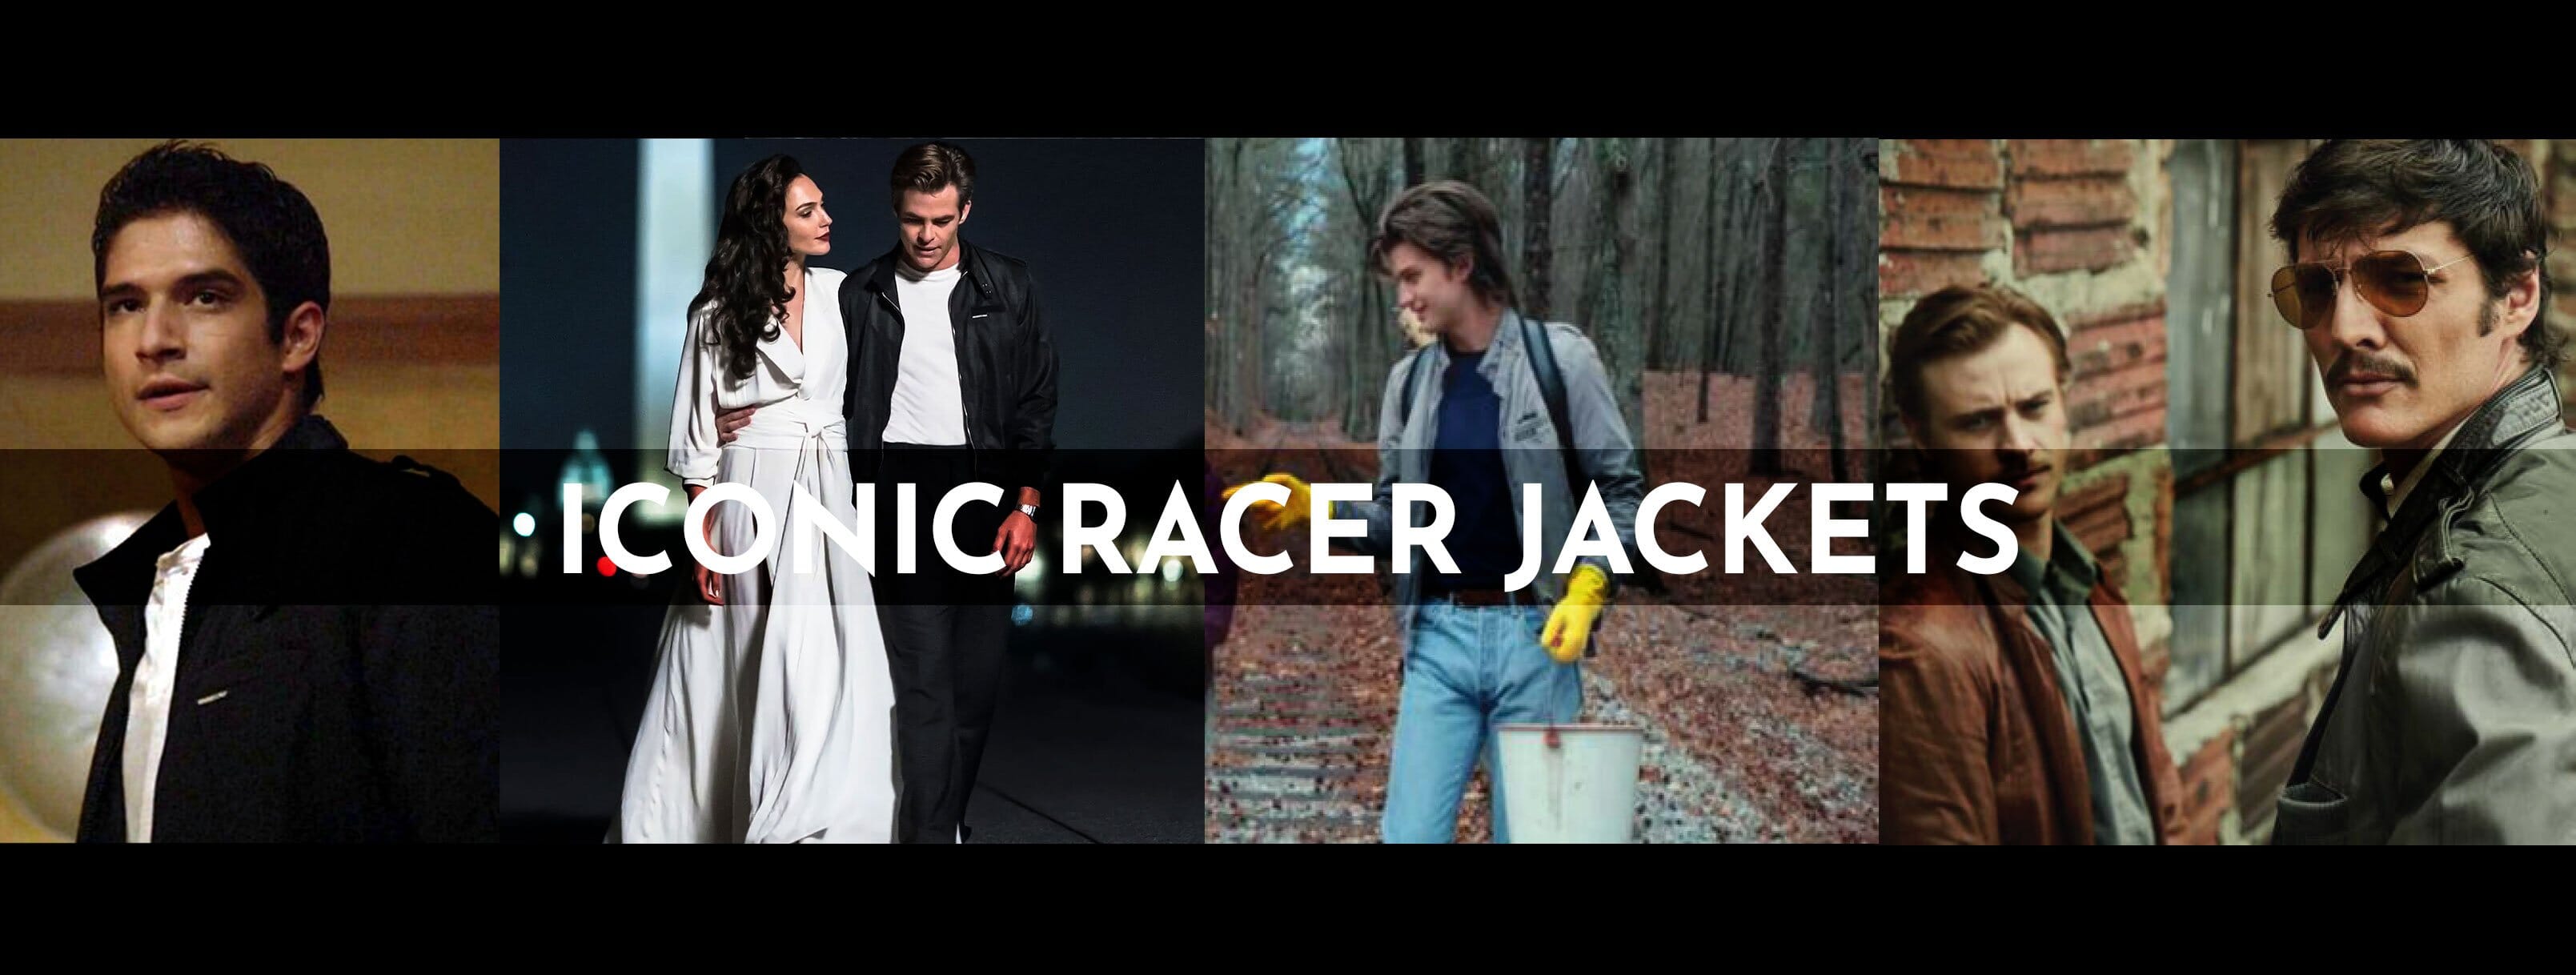 What makes the classic jacket so iconic?